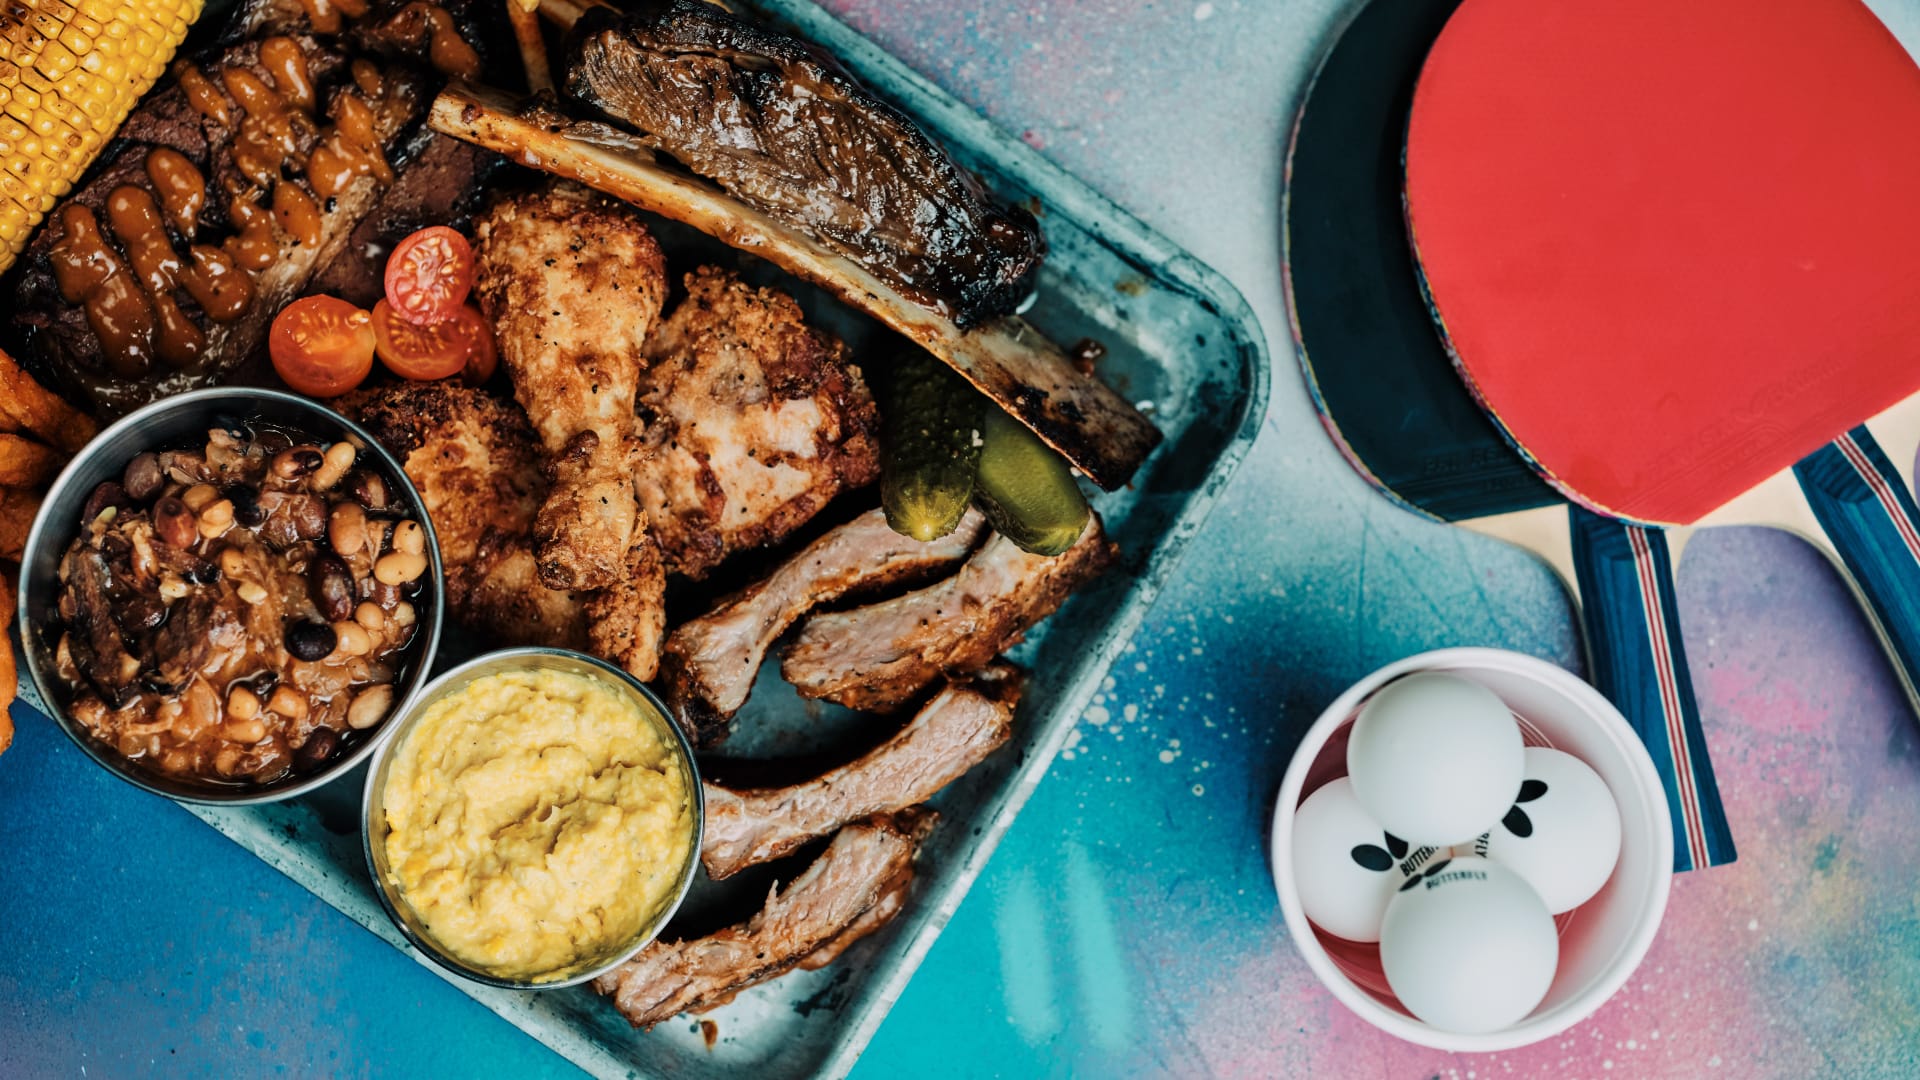 Business owner Marcus Calvani runs JB's Brewhouse, in St. Helier, Jersey, a bar and restaurant that sells Texas-style barbecue.